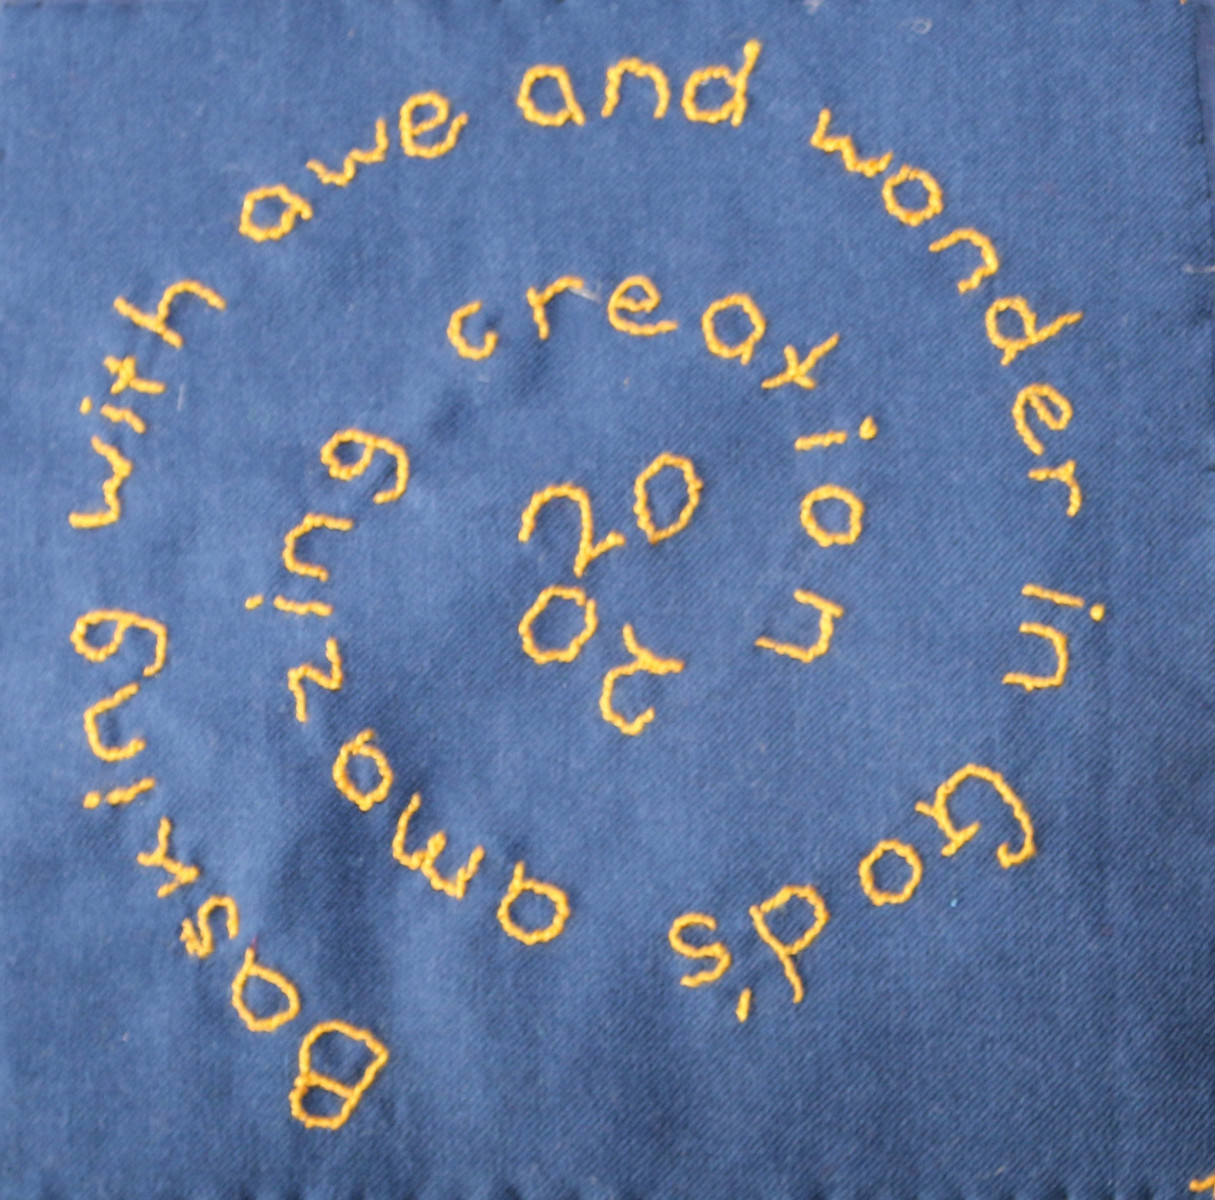 Embroidered words in a spiral: Basking with awe and wonder in God's amazing creation 2020